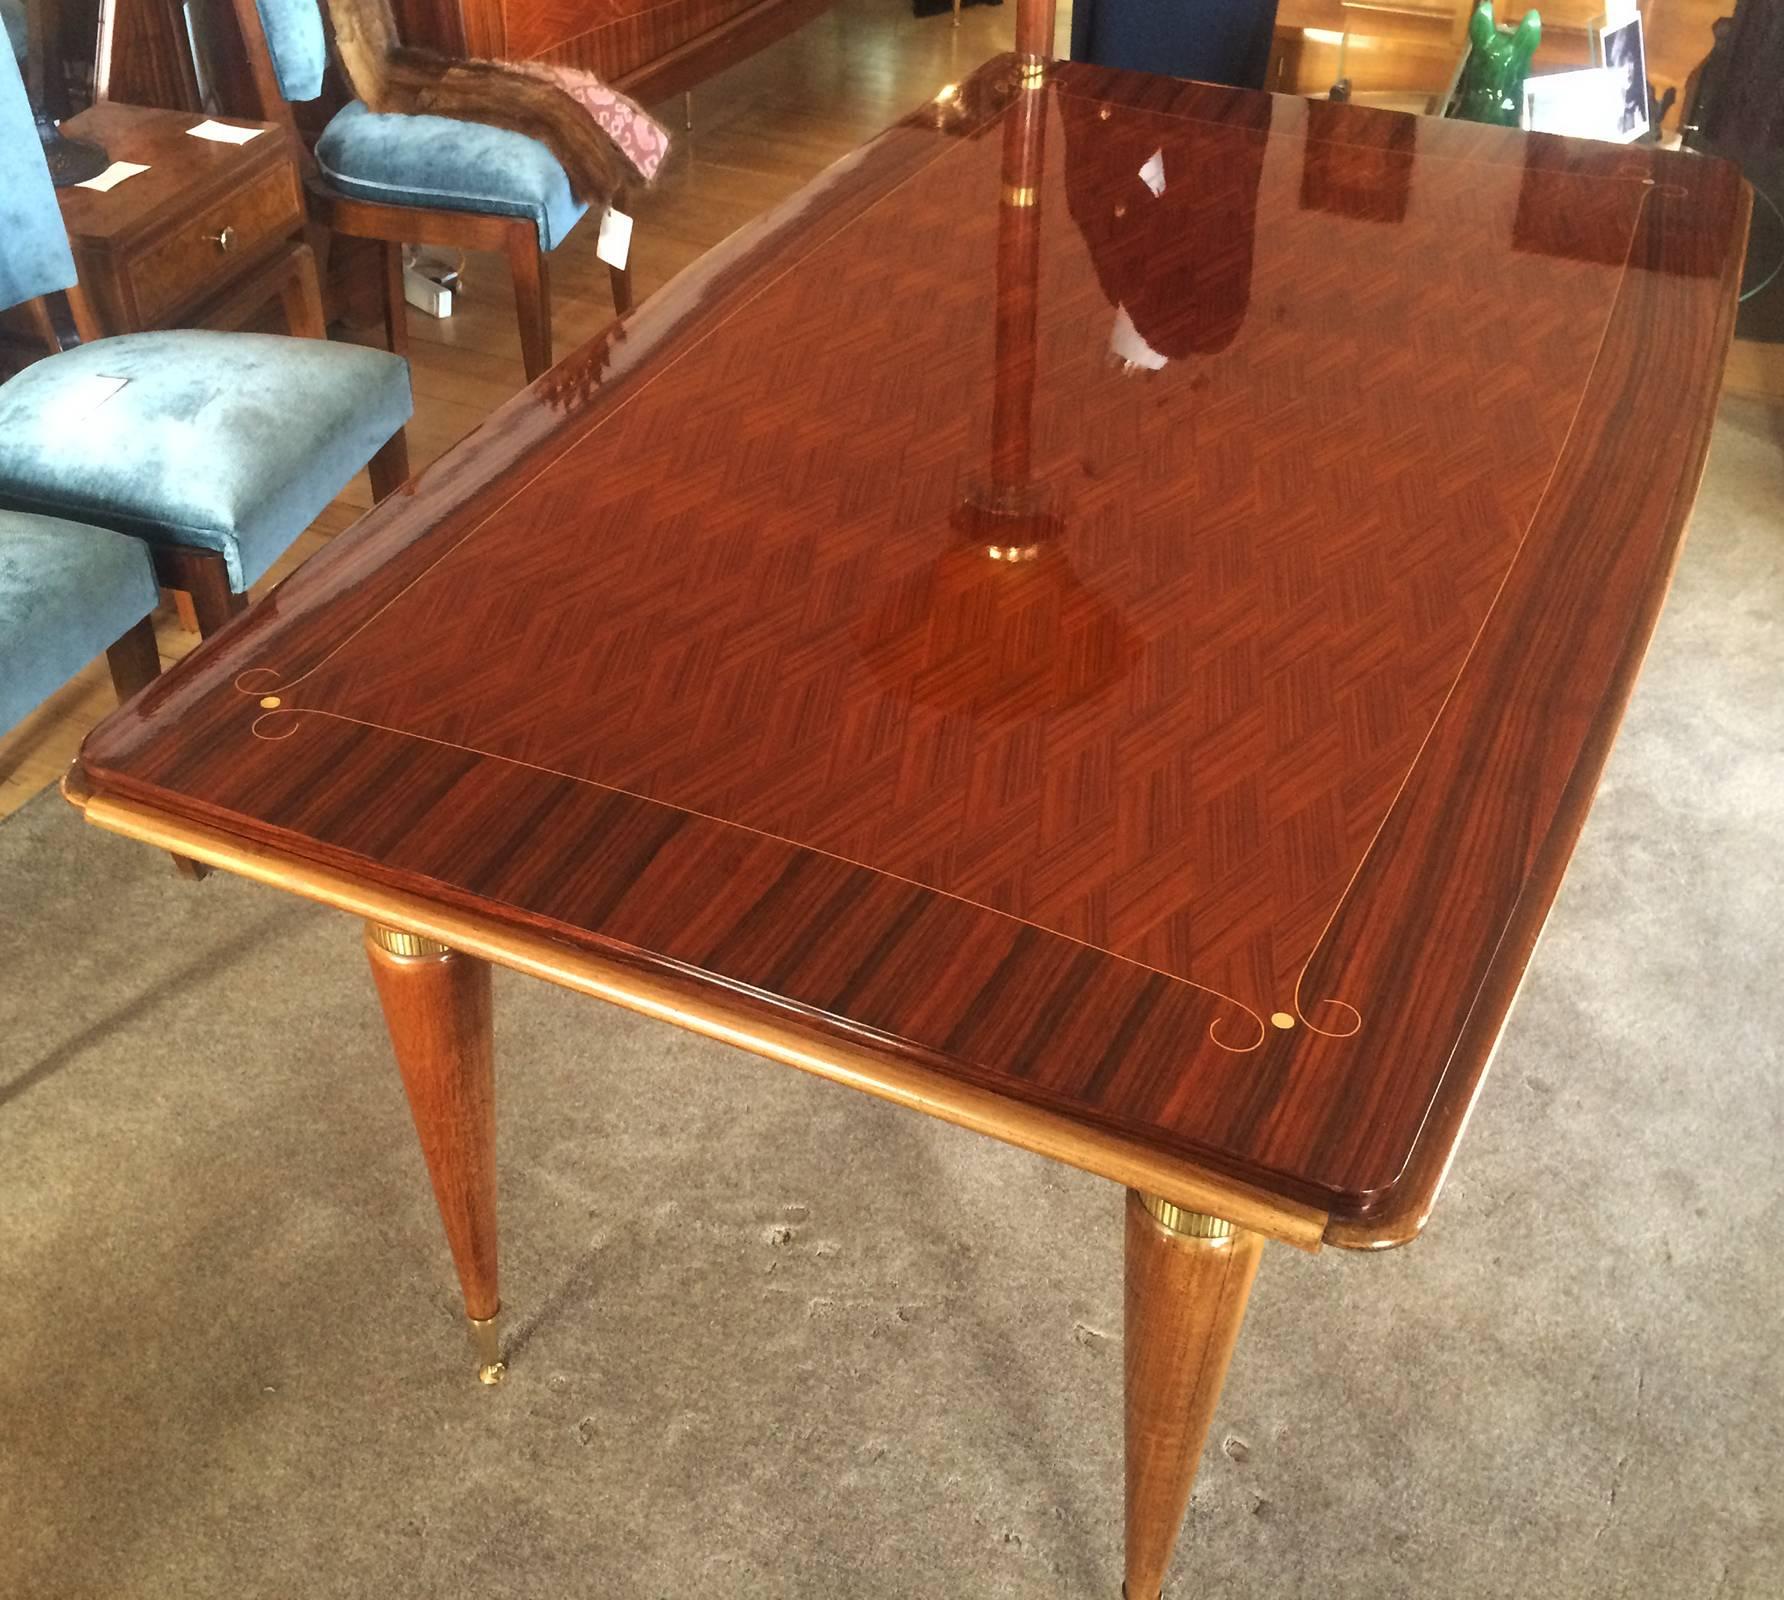 An Art Deco Extension Dining Table to seat 6 people (10 people with additional extensions). An amazing Herringbone design of Marquetry all over the table top, with a very fine (1mm wide) curved  pinstripe surround, of white birch separating it from